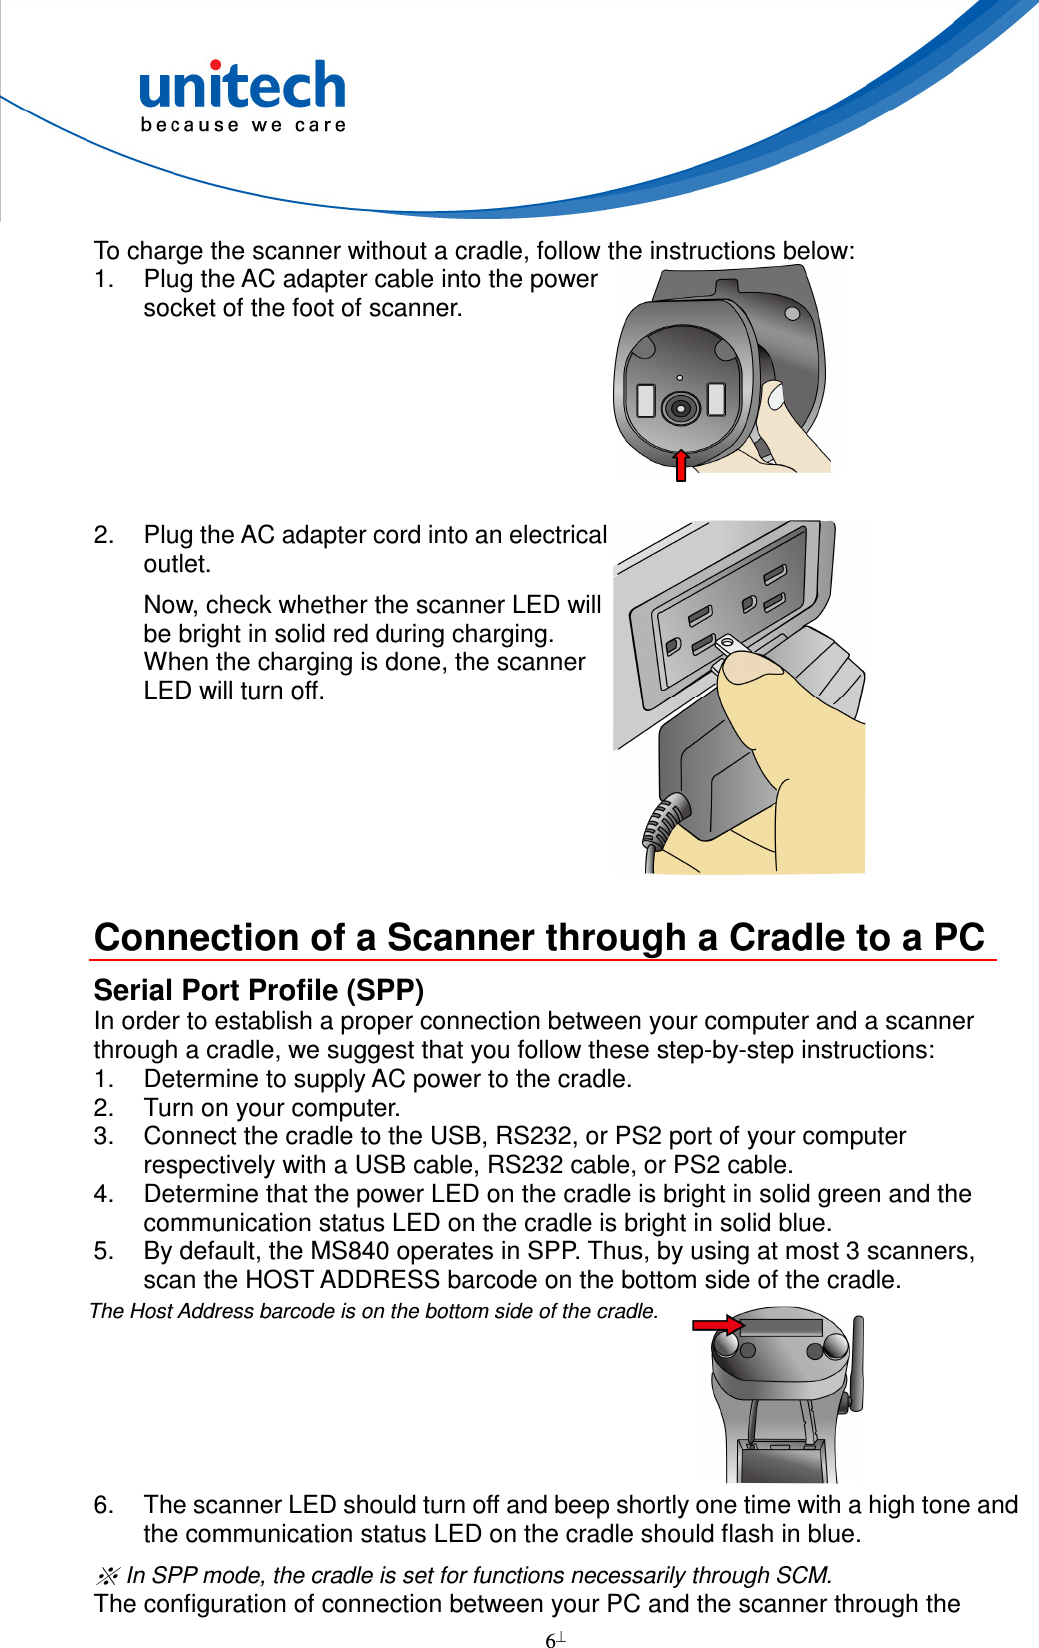  6  To charge the scanner without a cradle, follow the instructions below: 1.  Plug the AC adapter cable into the power socket of the foot of scanner.  2. Plug the AC adapter cord into an electrical outlet. Now, check whether the scanner LED will be bright in solid red during charging. When the charging is done, the scanner LED will turn off.   Connection of a Scanner through a Cradle to a PC Serial Port Profile (SPP) In order to establish a proper connection between your computer and a scanner through a cradle, we suggest that you follow these step-by-step instructions: 1.  Determine to supply AC power to the cradle. 2.  Turn on your computer. 3.  Connect the cradle to the USB, RS232, or PS2 port of your computer respectively with a USB cable, RS232 cable, or PS2 cable. 4.  Determine that the power LED on the cradle is bright in solid green and the communication status LED on the cradle is bright in solid blue. 5.  By default, the MS840 operates in SPP. Thus, by using at most 3 scanners, scan the HOST ADDRESS barcode on the bottom side of the cradle.        6.  The scanner LED should turn off and beep shortly one time with a high tone and the communication status LED on the cradle should flash in blue.  In SPP mode, the cradle is set for functions necessarily through SCM. The configuration of connection between your PC and the scanner through the The Host Address barcode is on the bottom side of the cradle.  